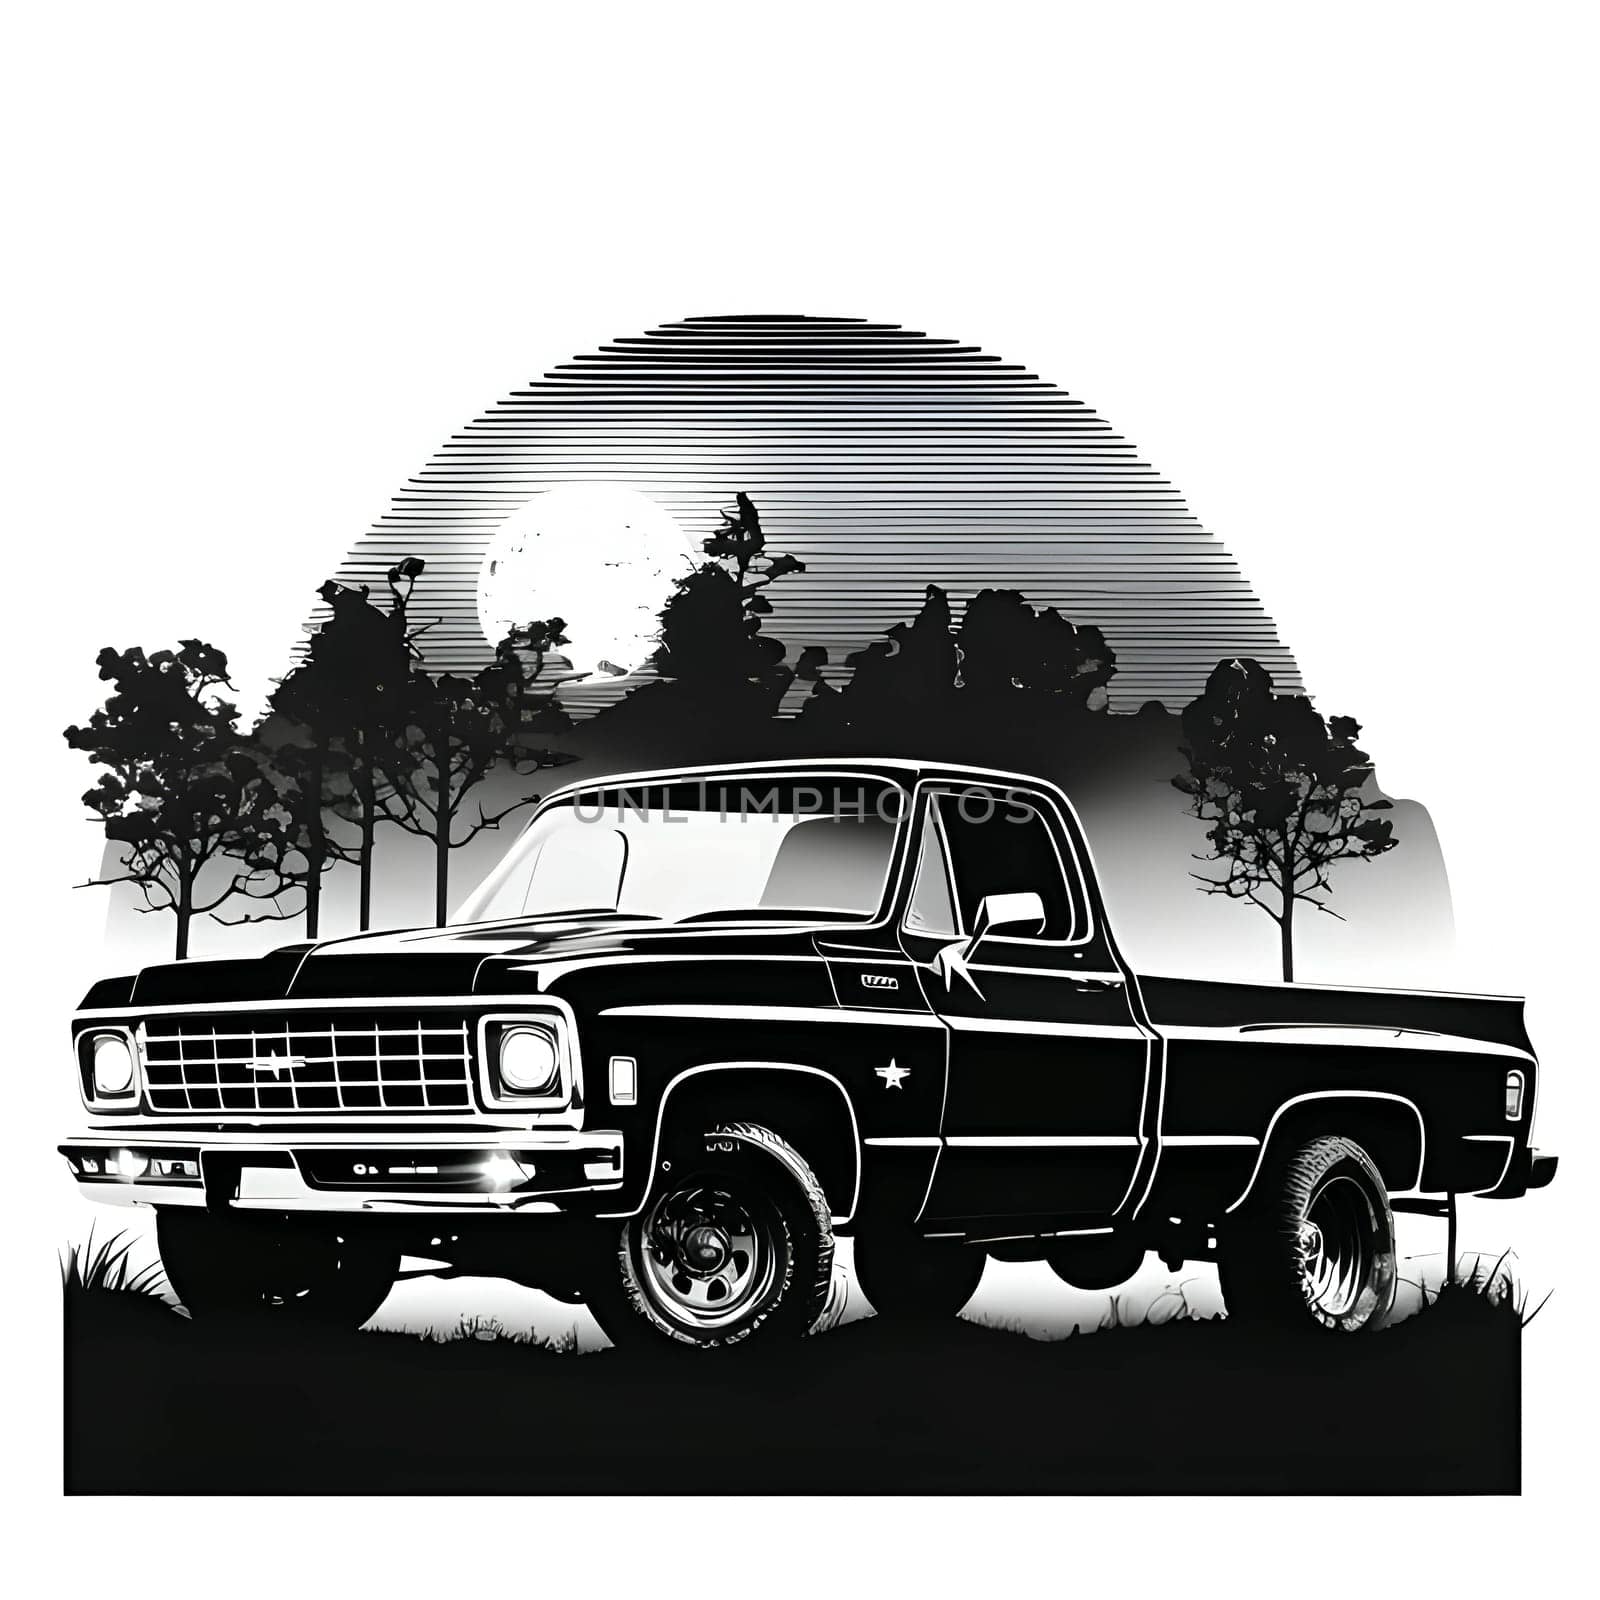 Vector illustration of a pickup in black silhouette against a clean white background, capturing graceful forms.